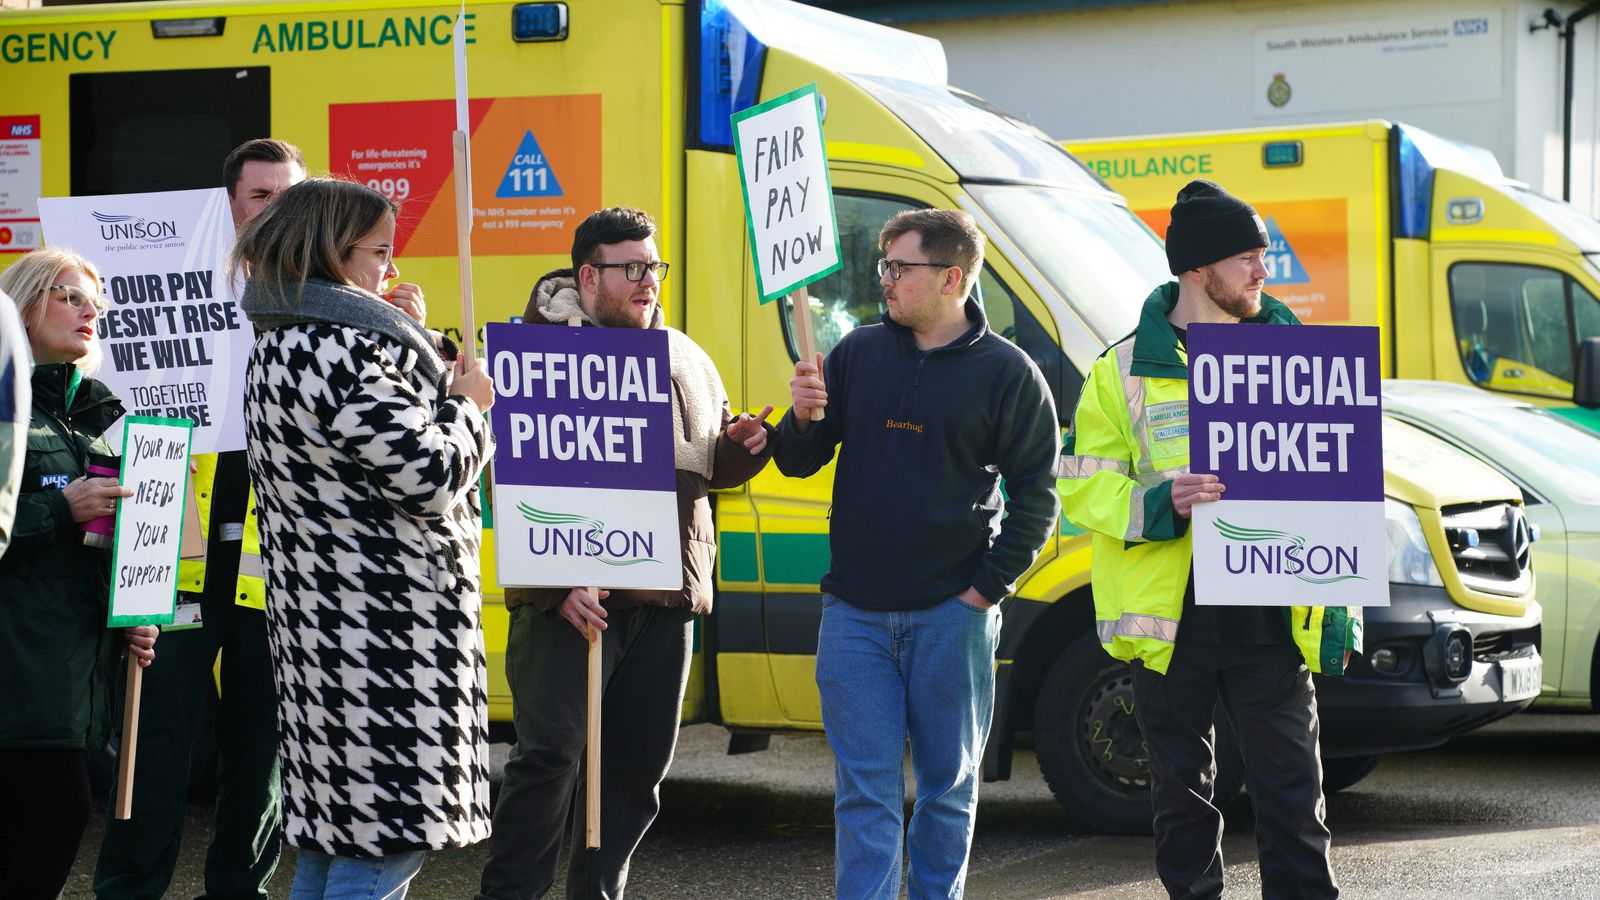 NHS staff could be offered pay rise in spring in bid to end strikes